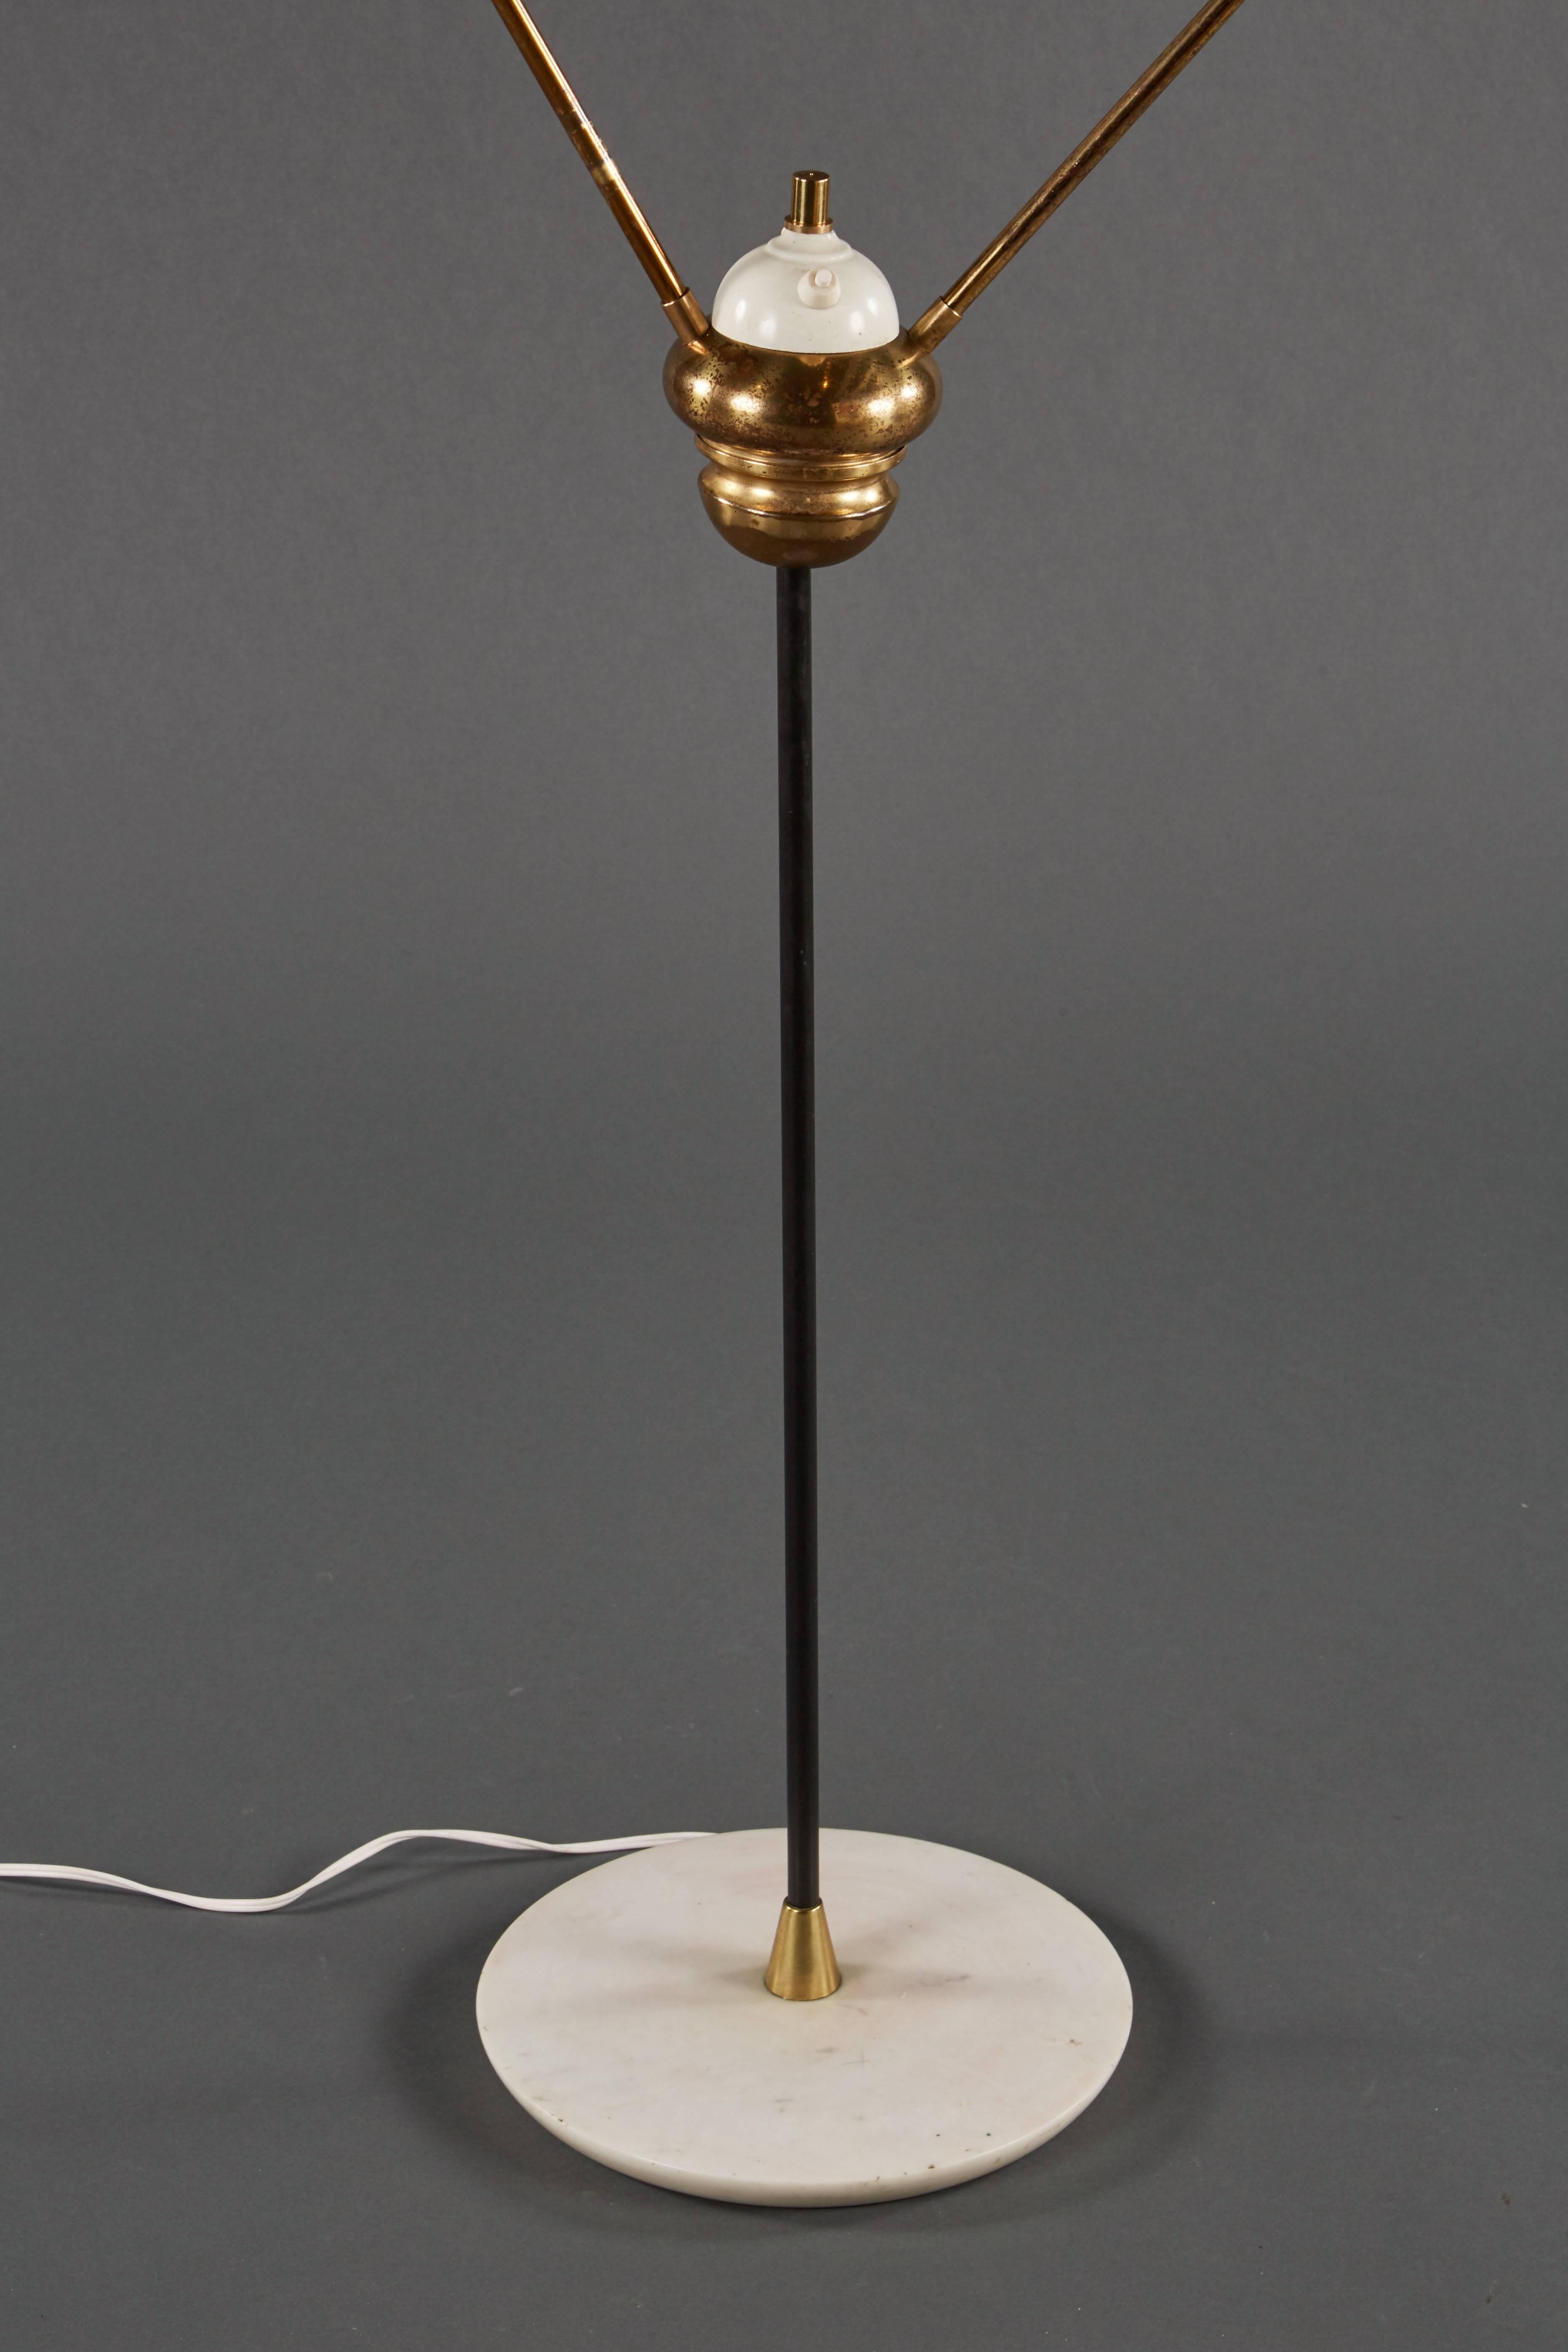 20th Century Charming Double Arm Italian Floor Lamp with Articulating Vented Metal Shades